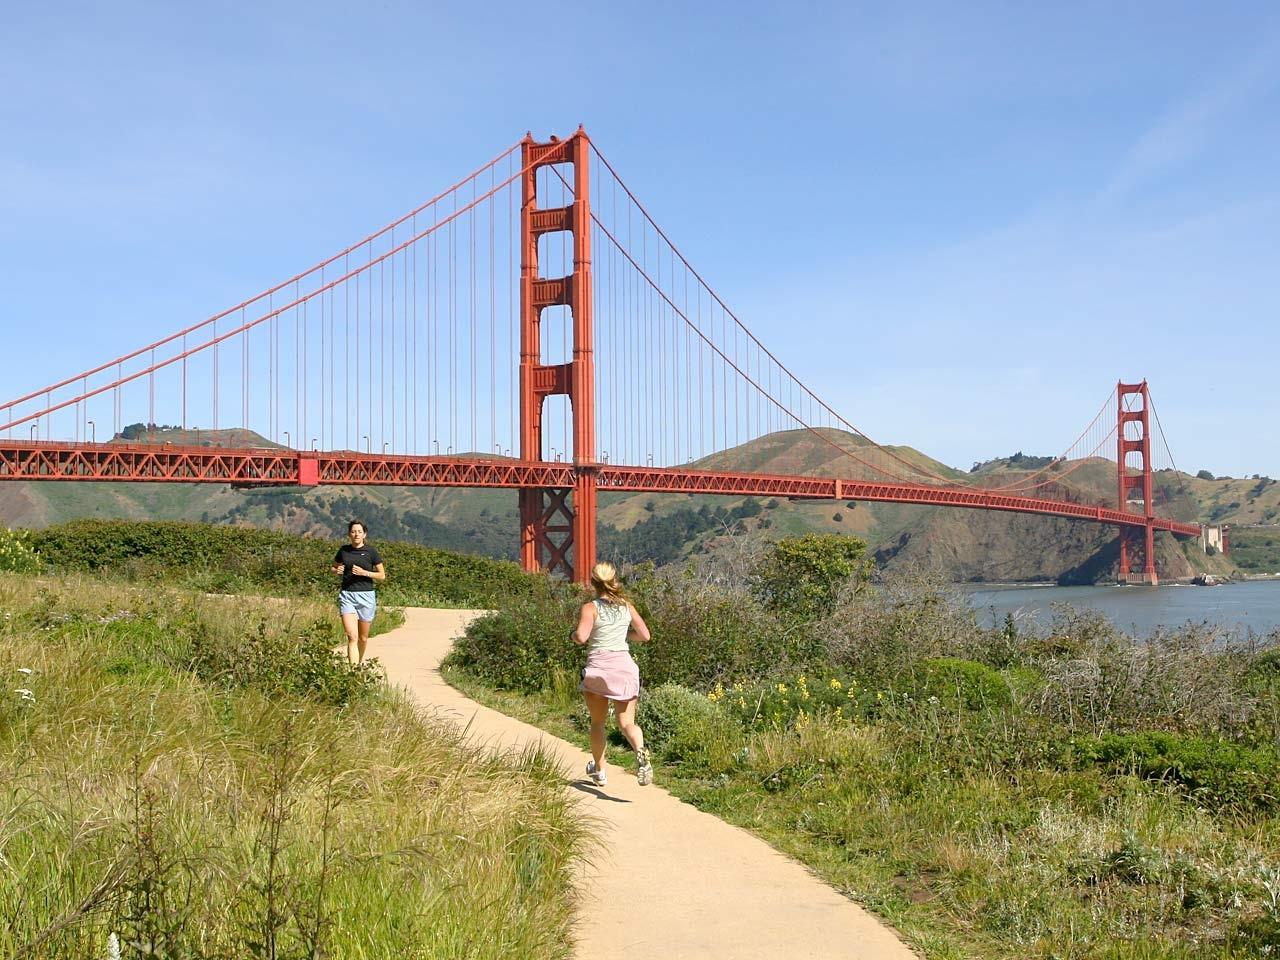 Person jogging along a path with golden gate bridge in the background.